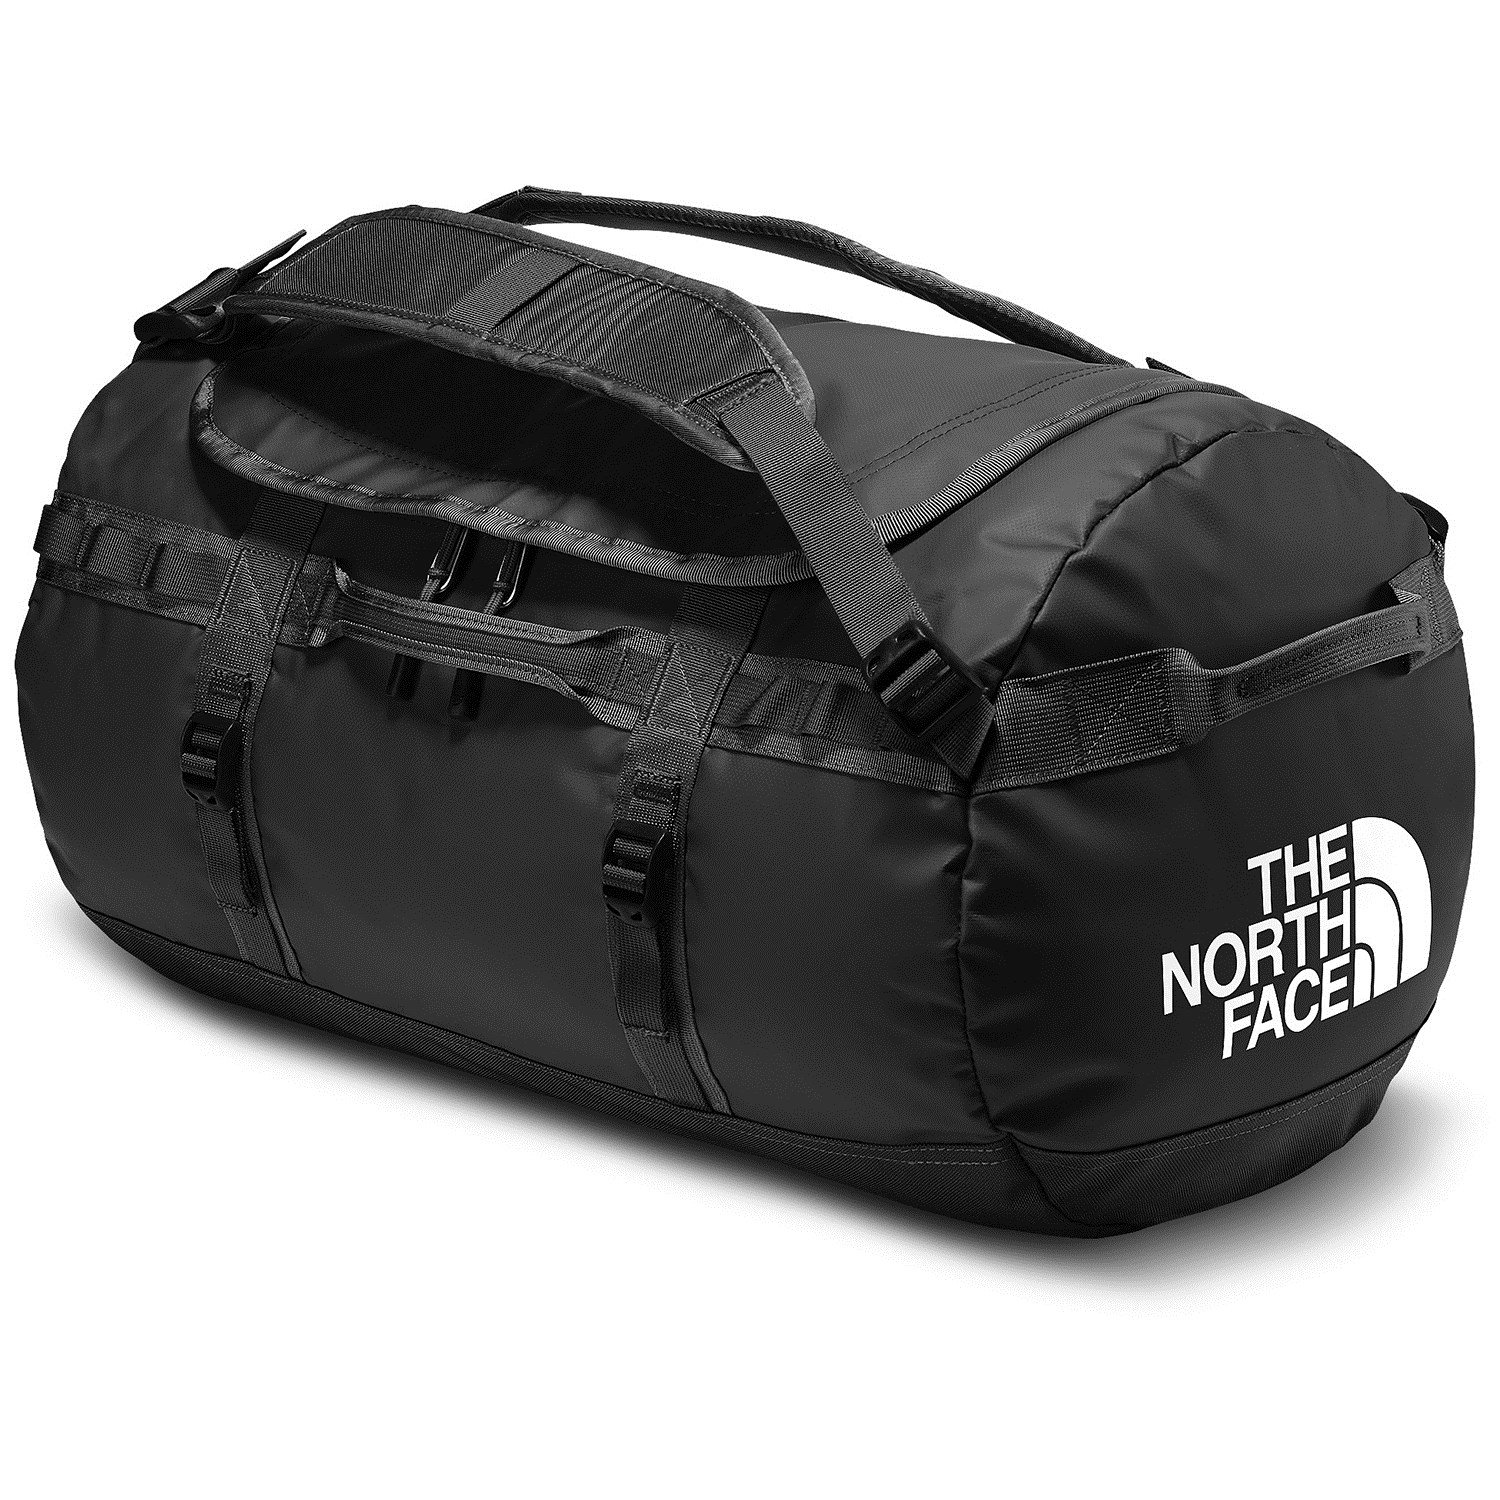 Face camp. The North face сумка Base Camp. Баул the North face Base Camp. Баул the North face Base Camp Duffel. Сумка the North face Base Camp Duffel.